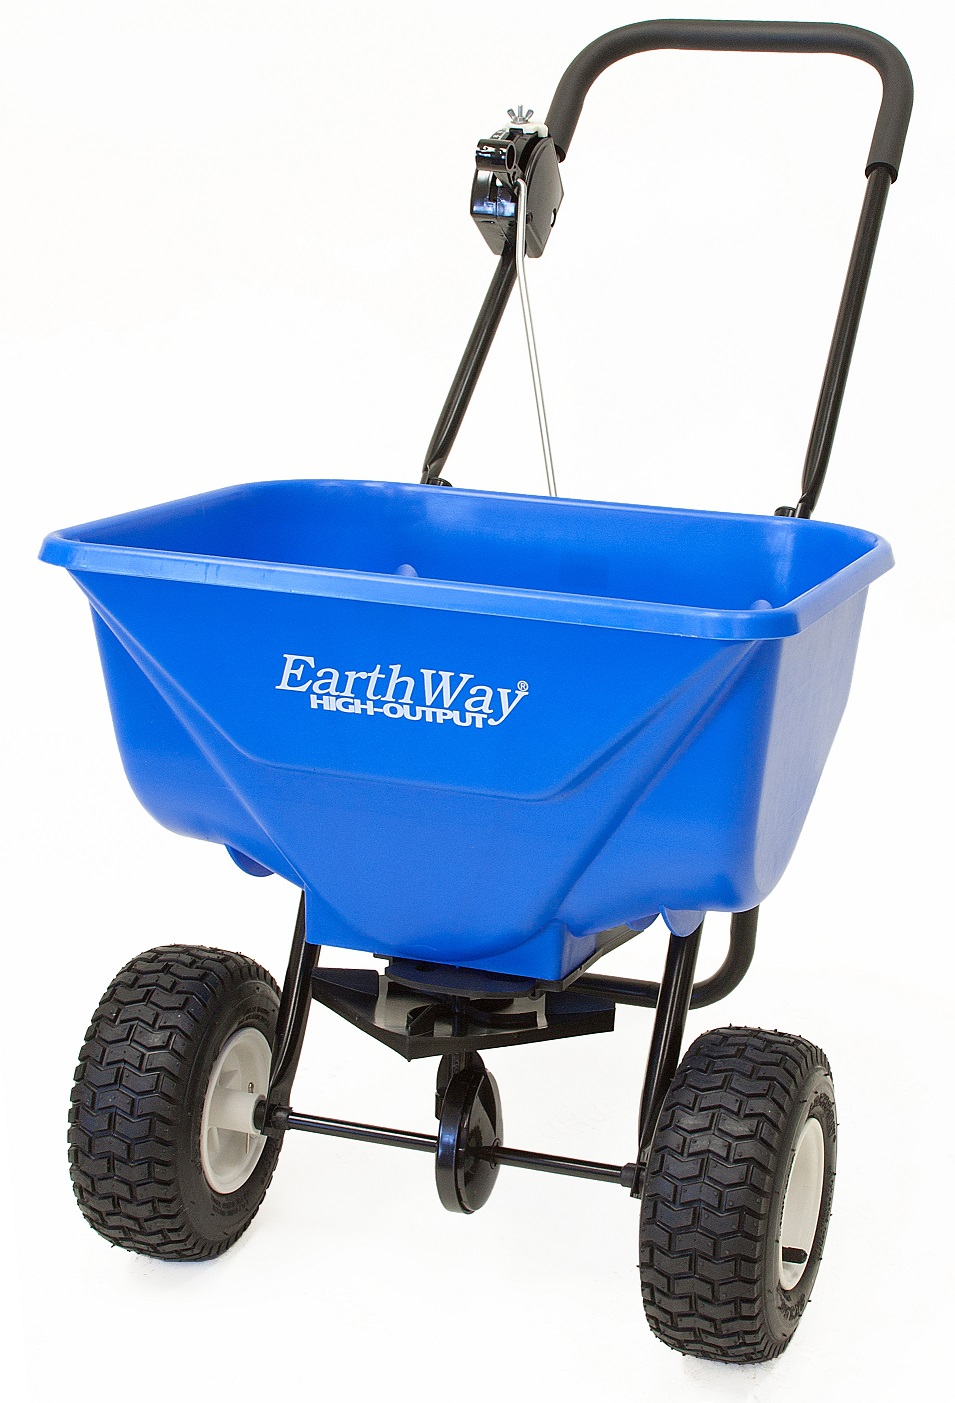 Earthway 2040Pi Plus 65lb Spreader with 9" Pneum Tire